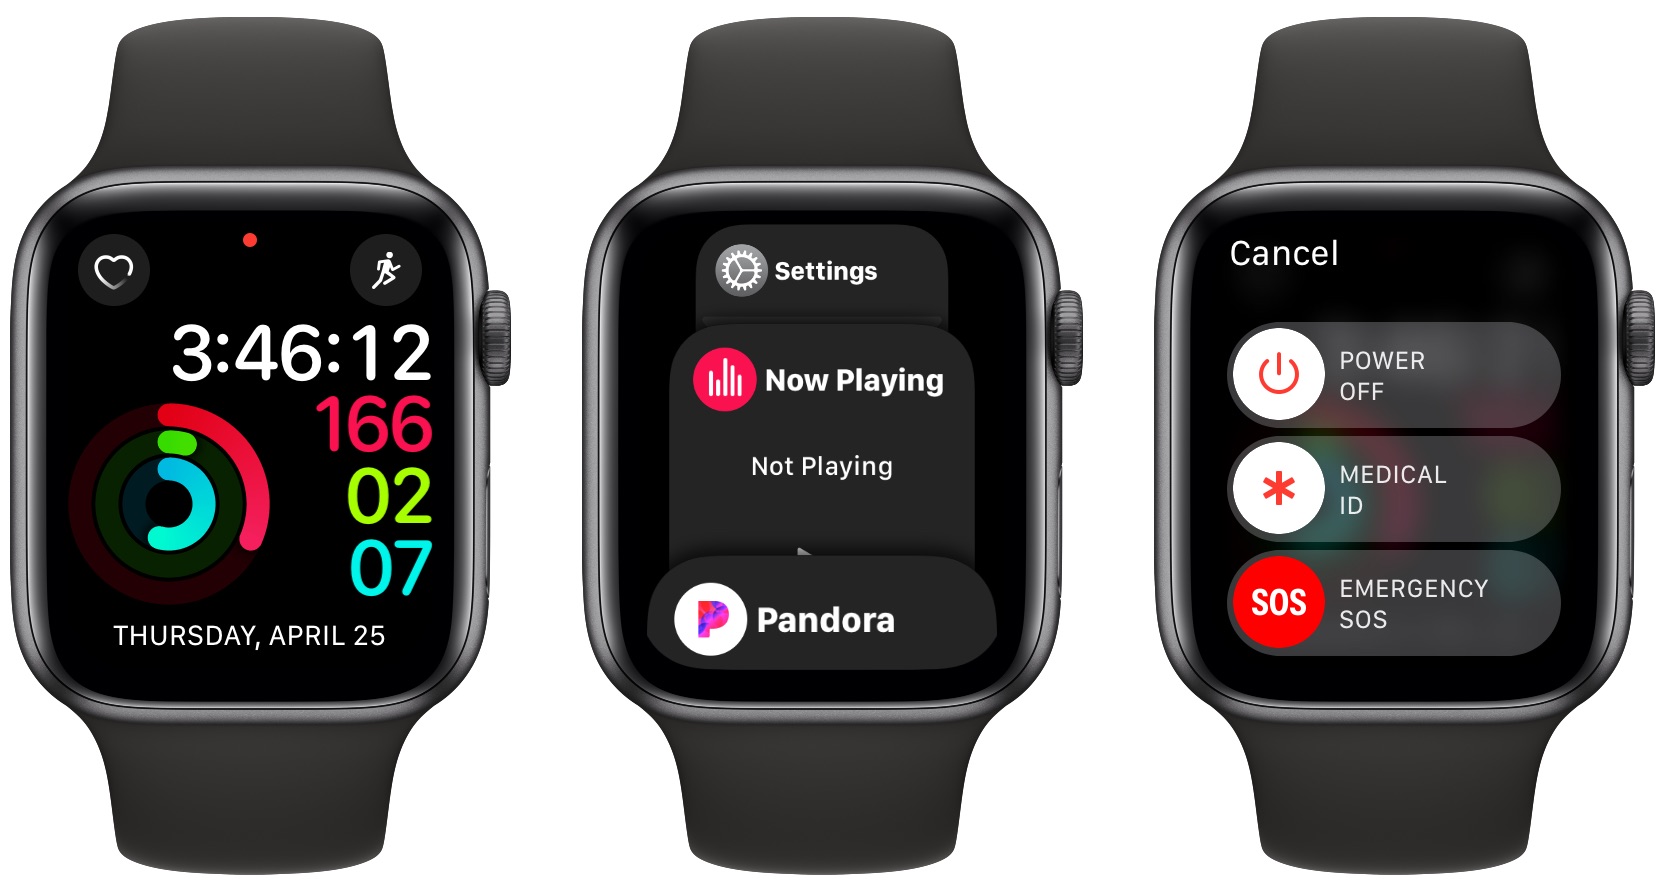 where is the power button on Apple Watch?